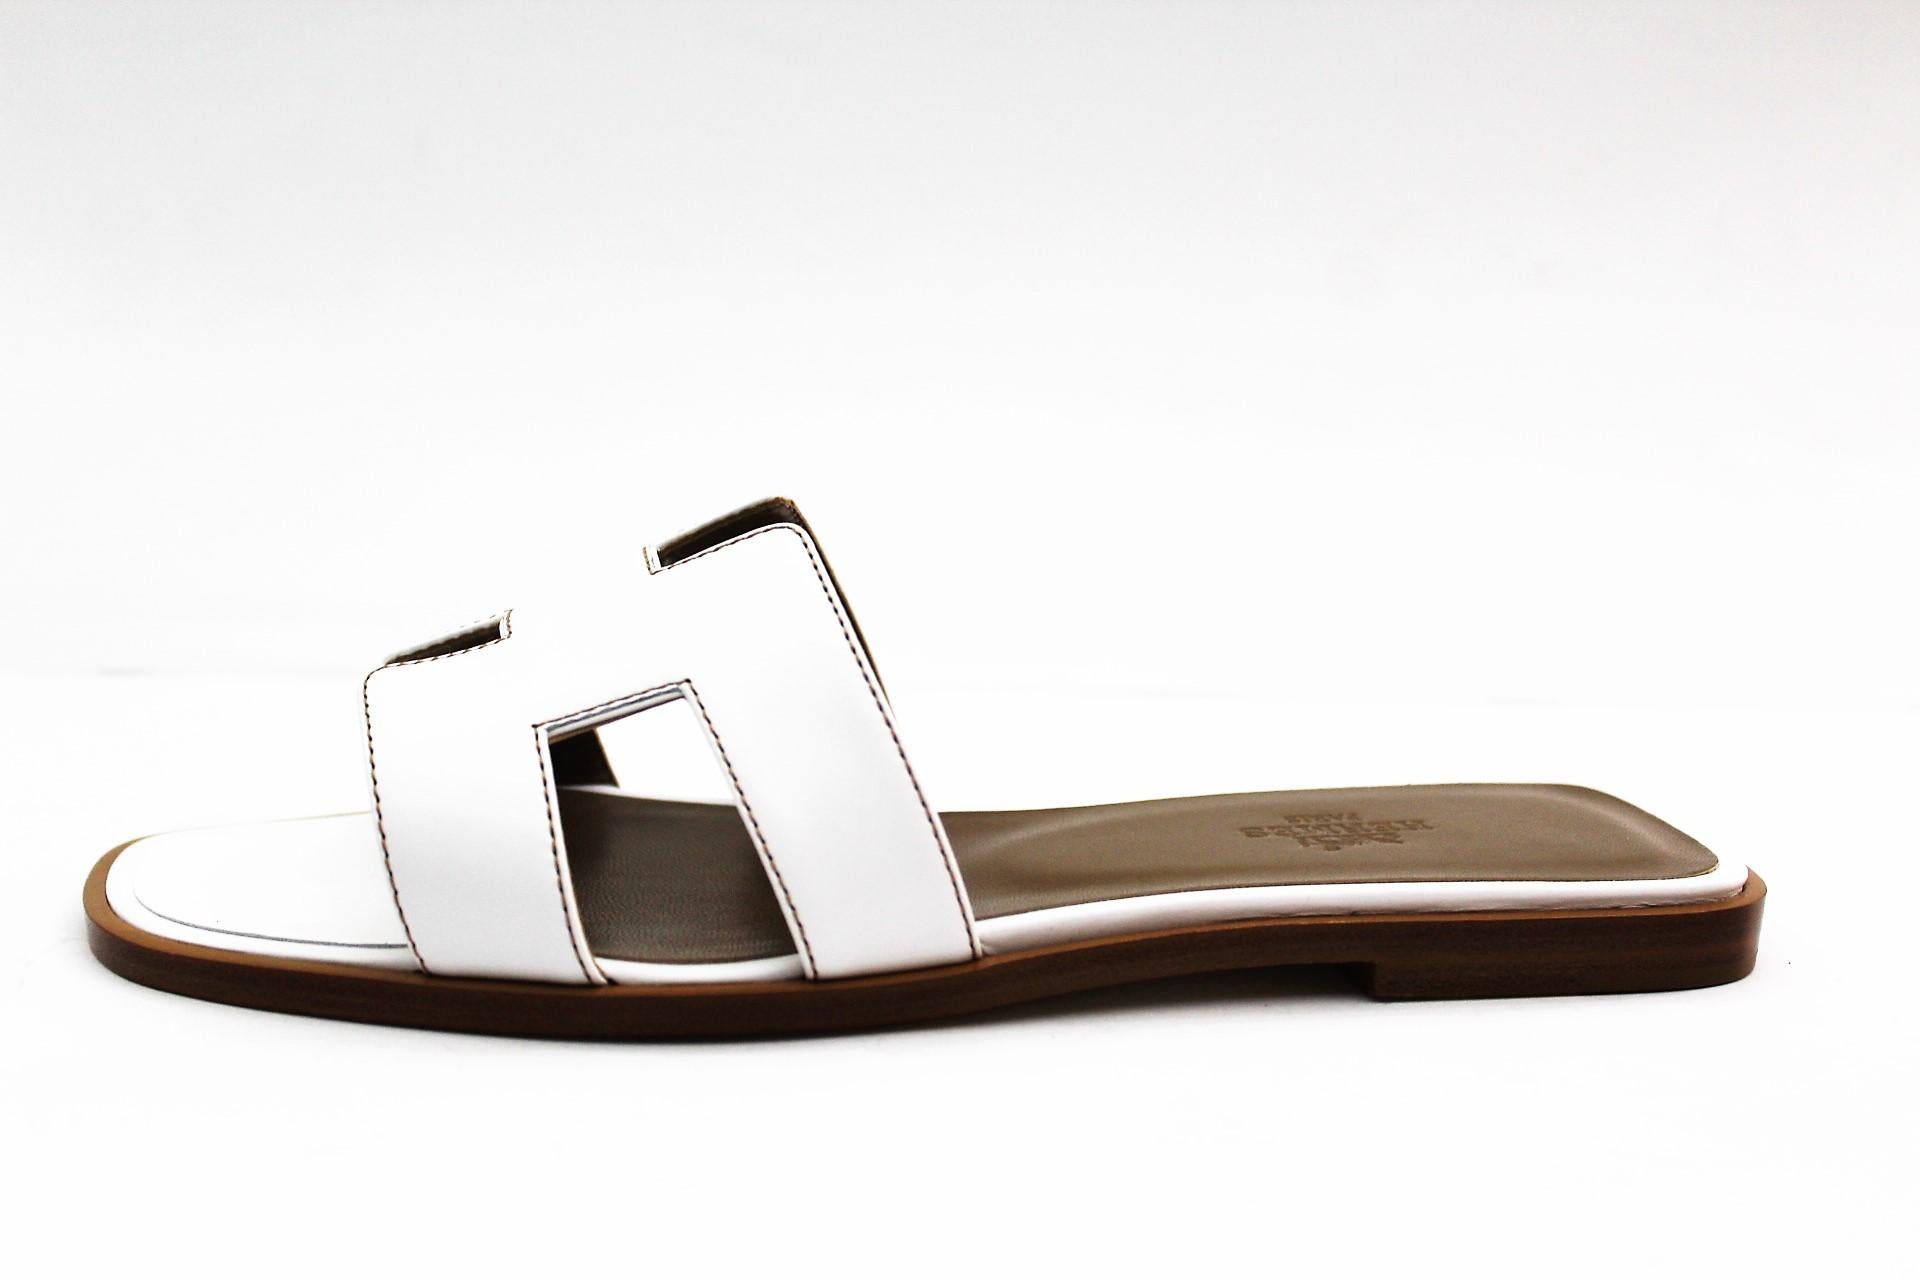 Hermes Oran sandals
New and never worn with box 
White and brown leather 
Size 37 1/2 EU